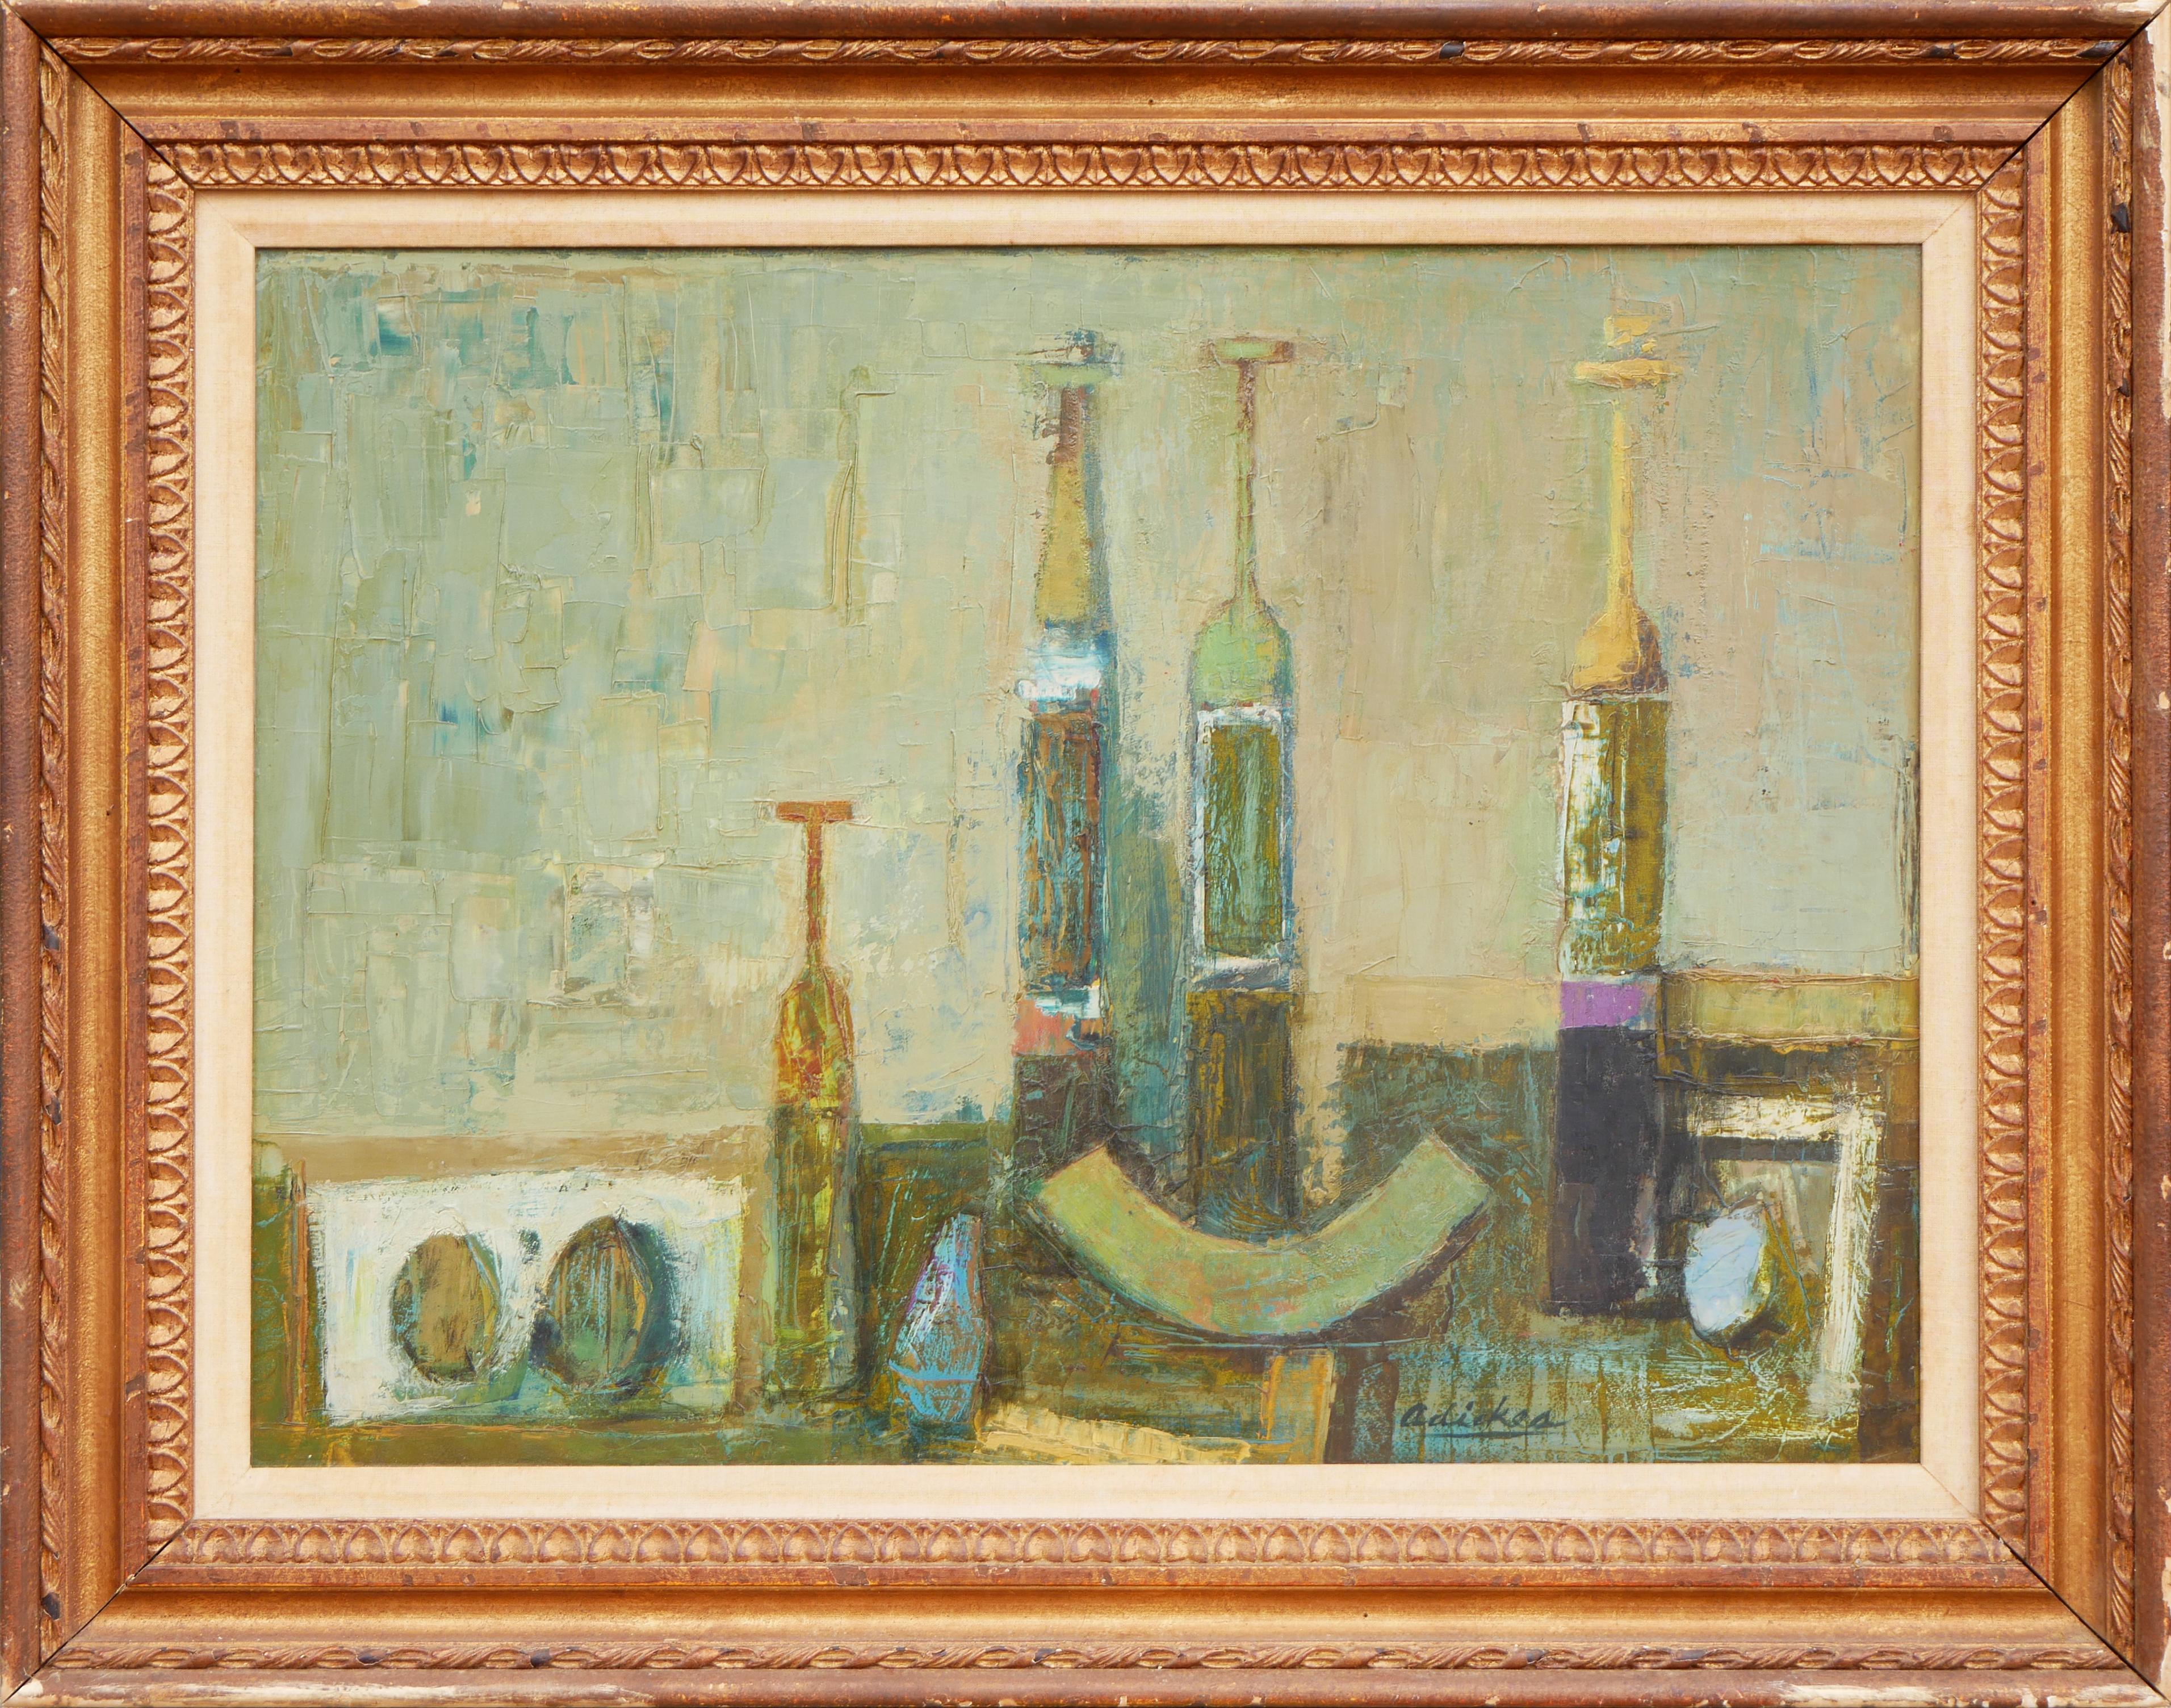 David Adickes Abstract Painting - "Bottles Brown and Green" Green Toned Modernist Abstract Still Life